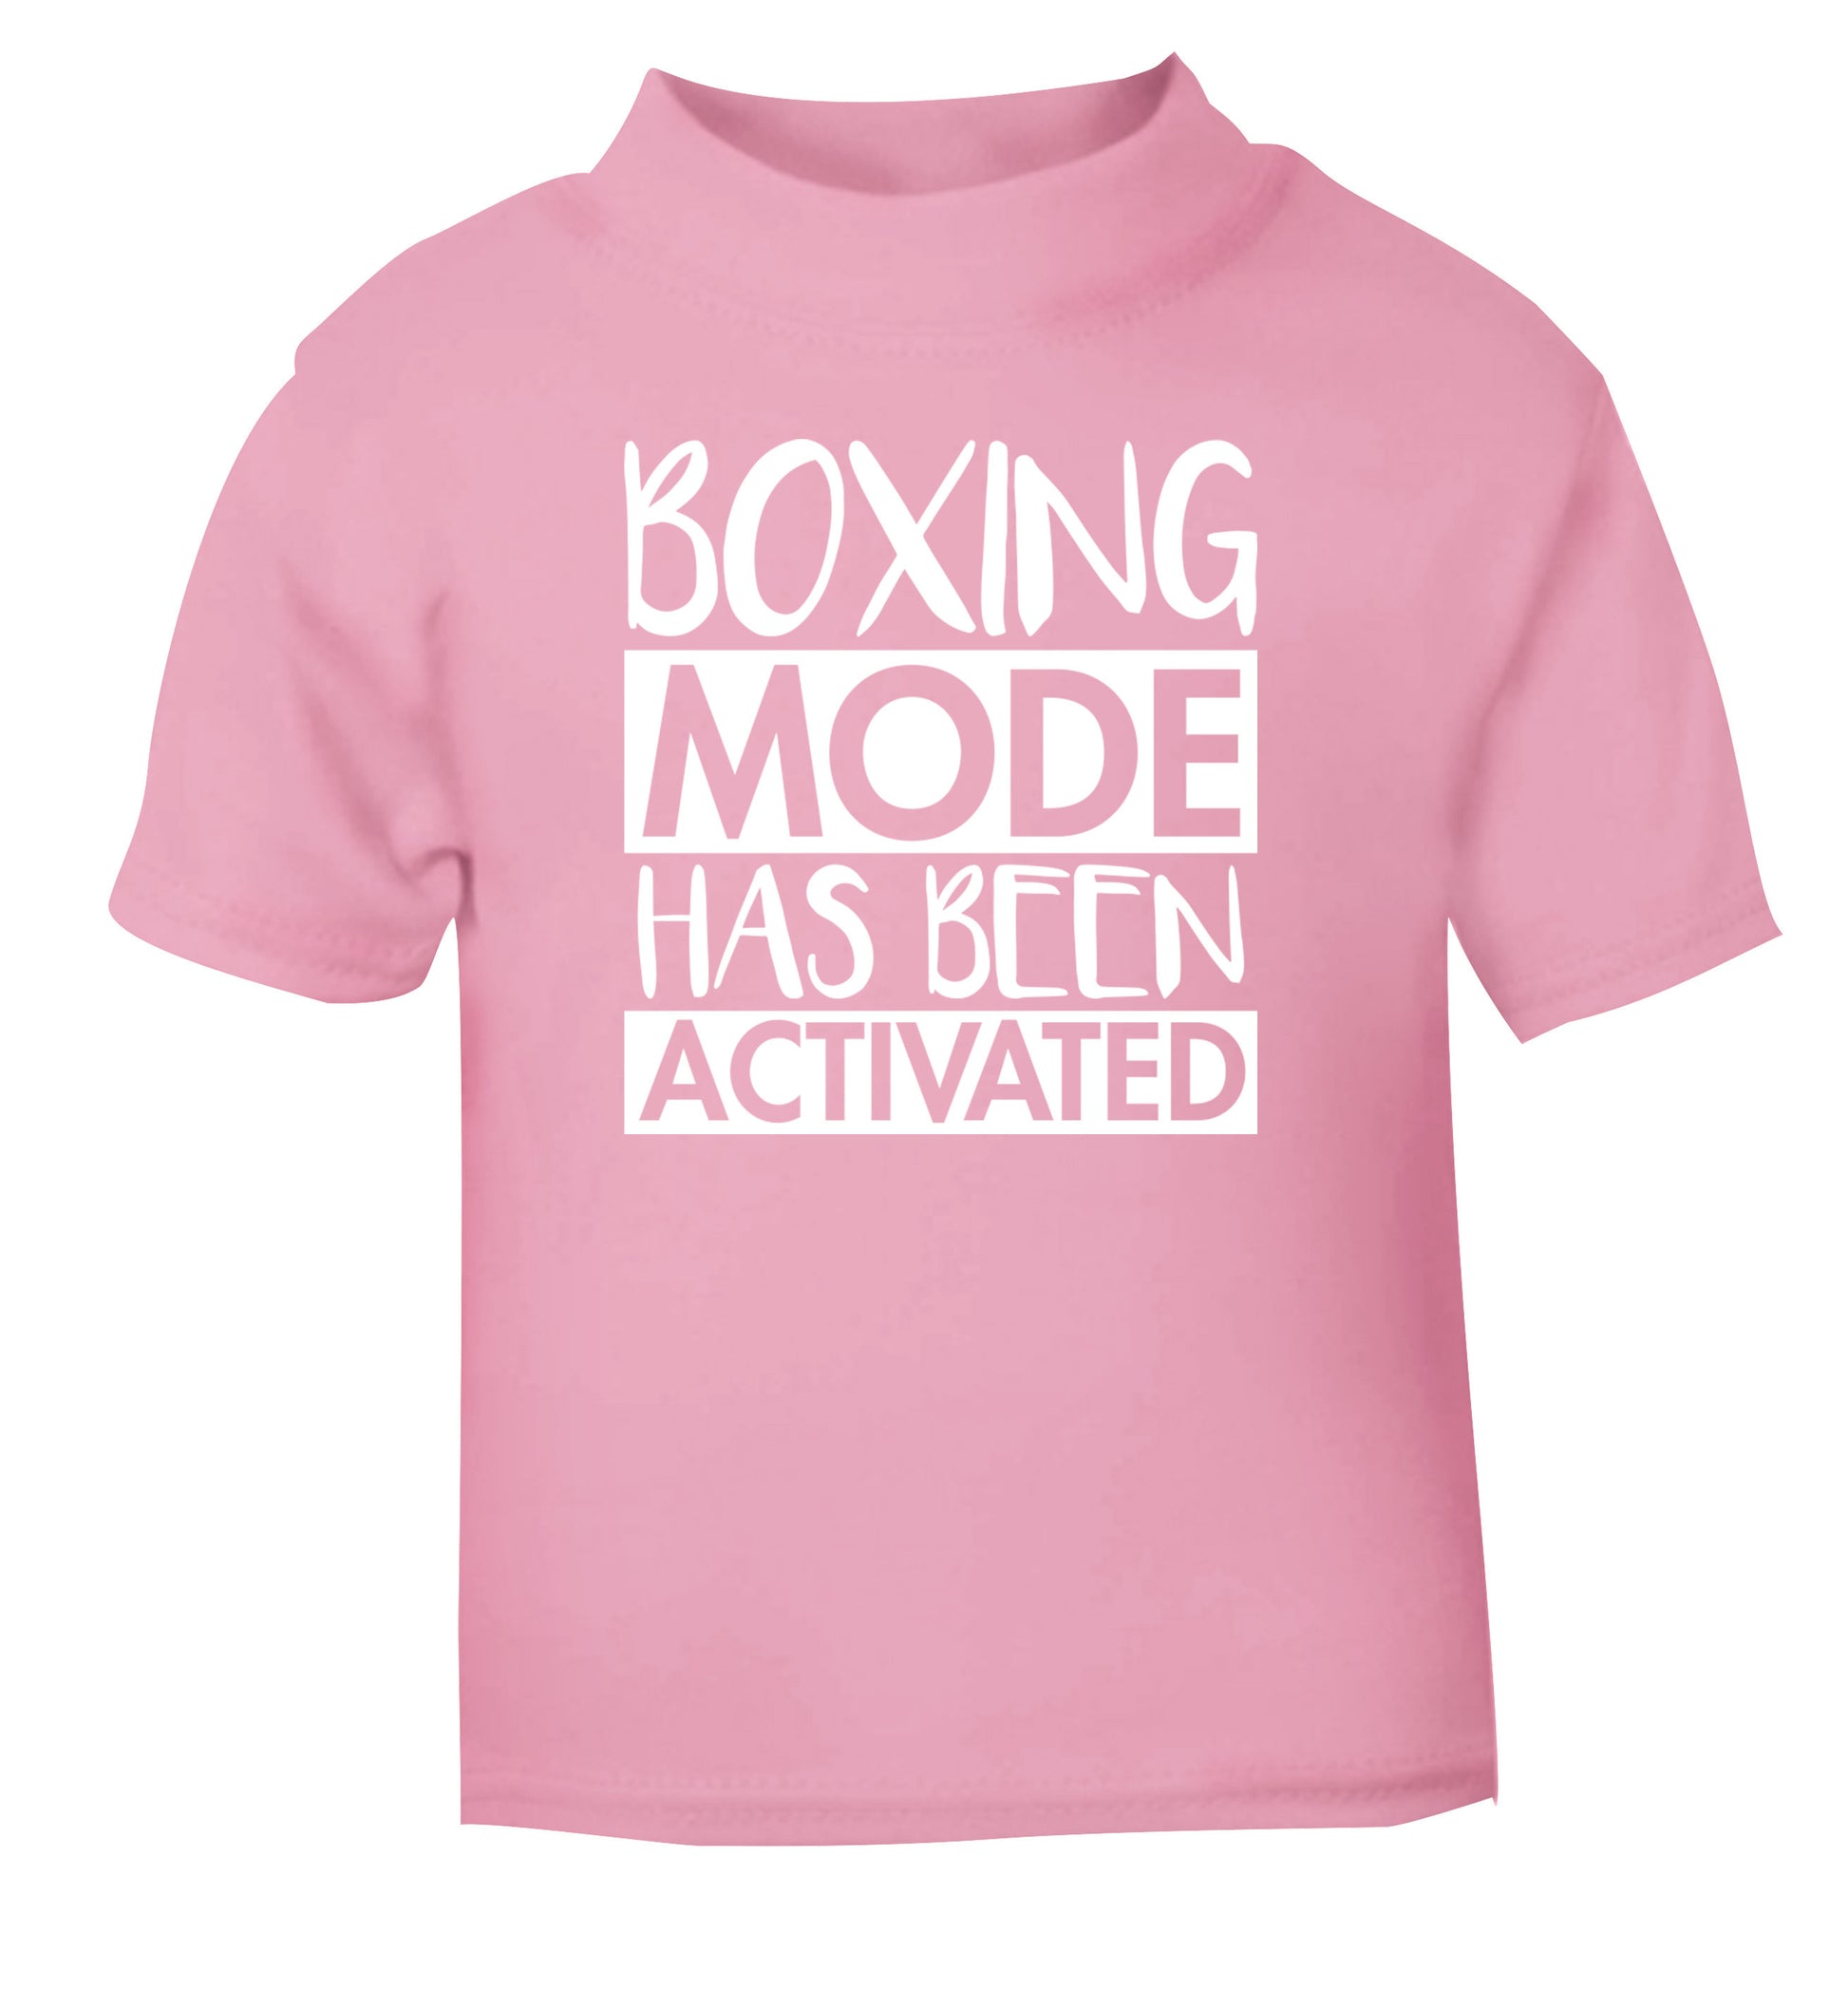 Boxing mode activated light pink Baby Toddler Tshirt 2 Years